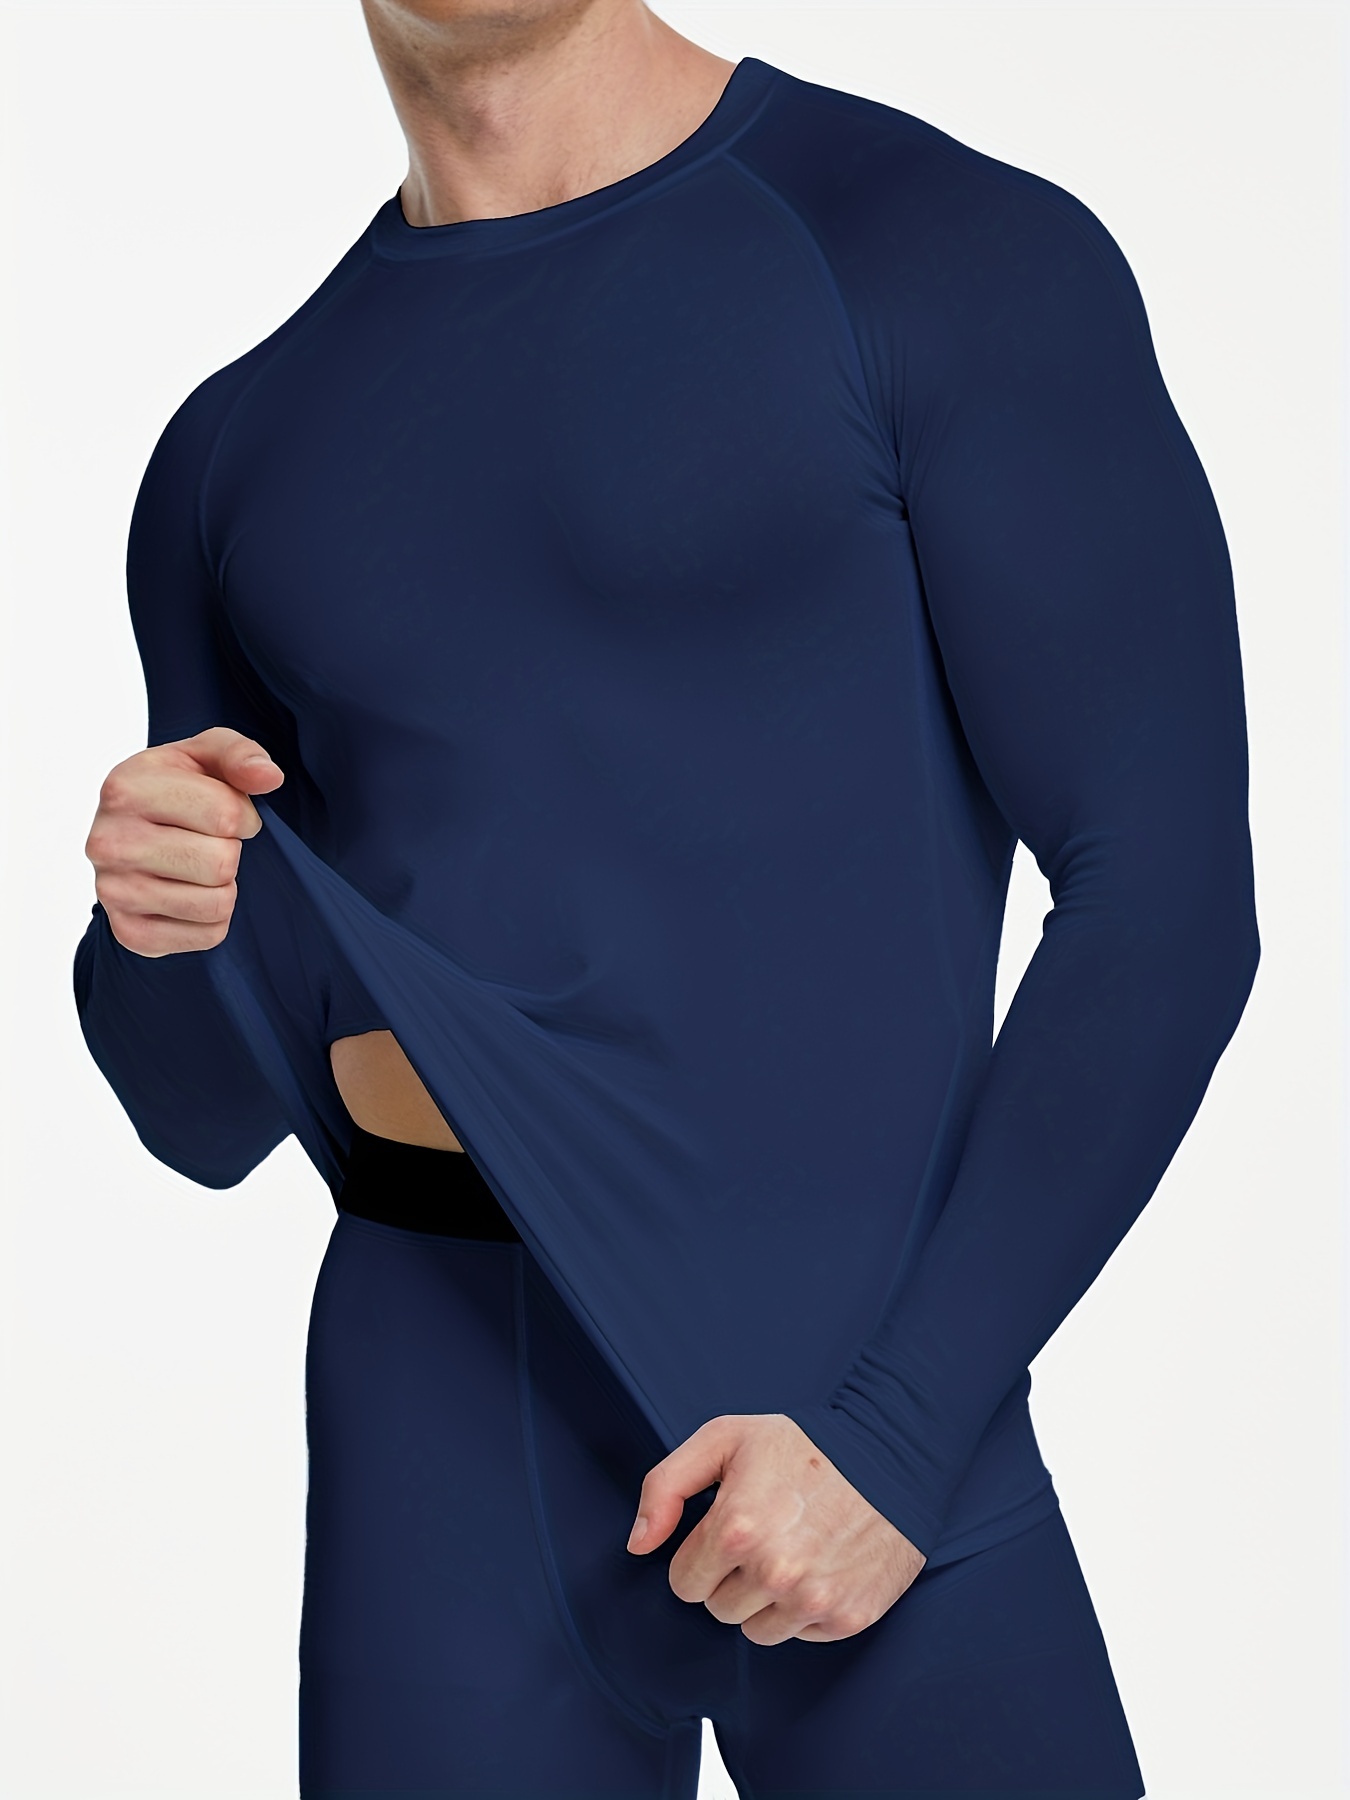 Athletic Works Men's Underwear Long Sleeve Compression T-shirt 